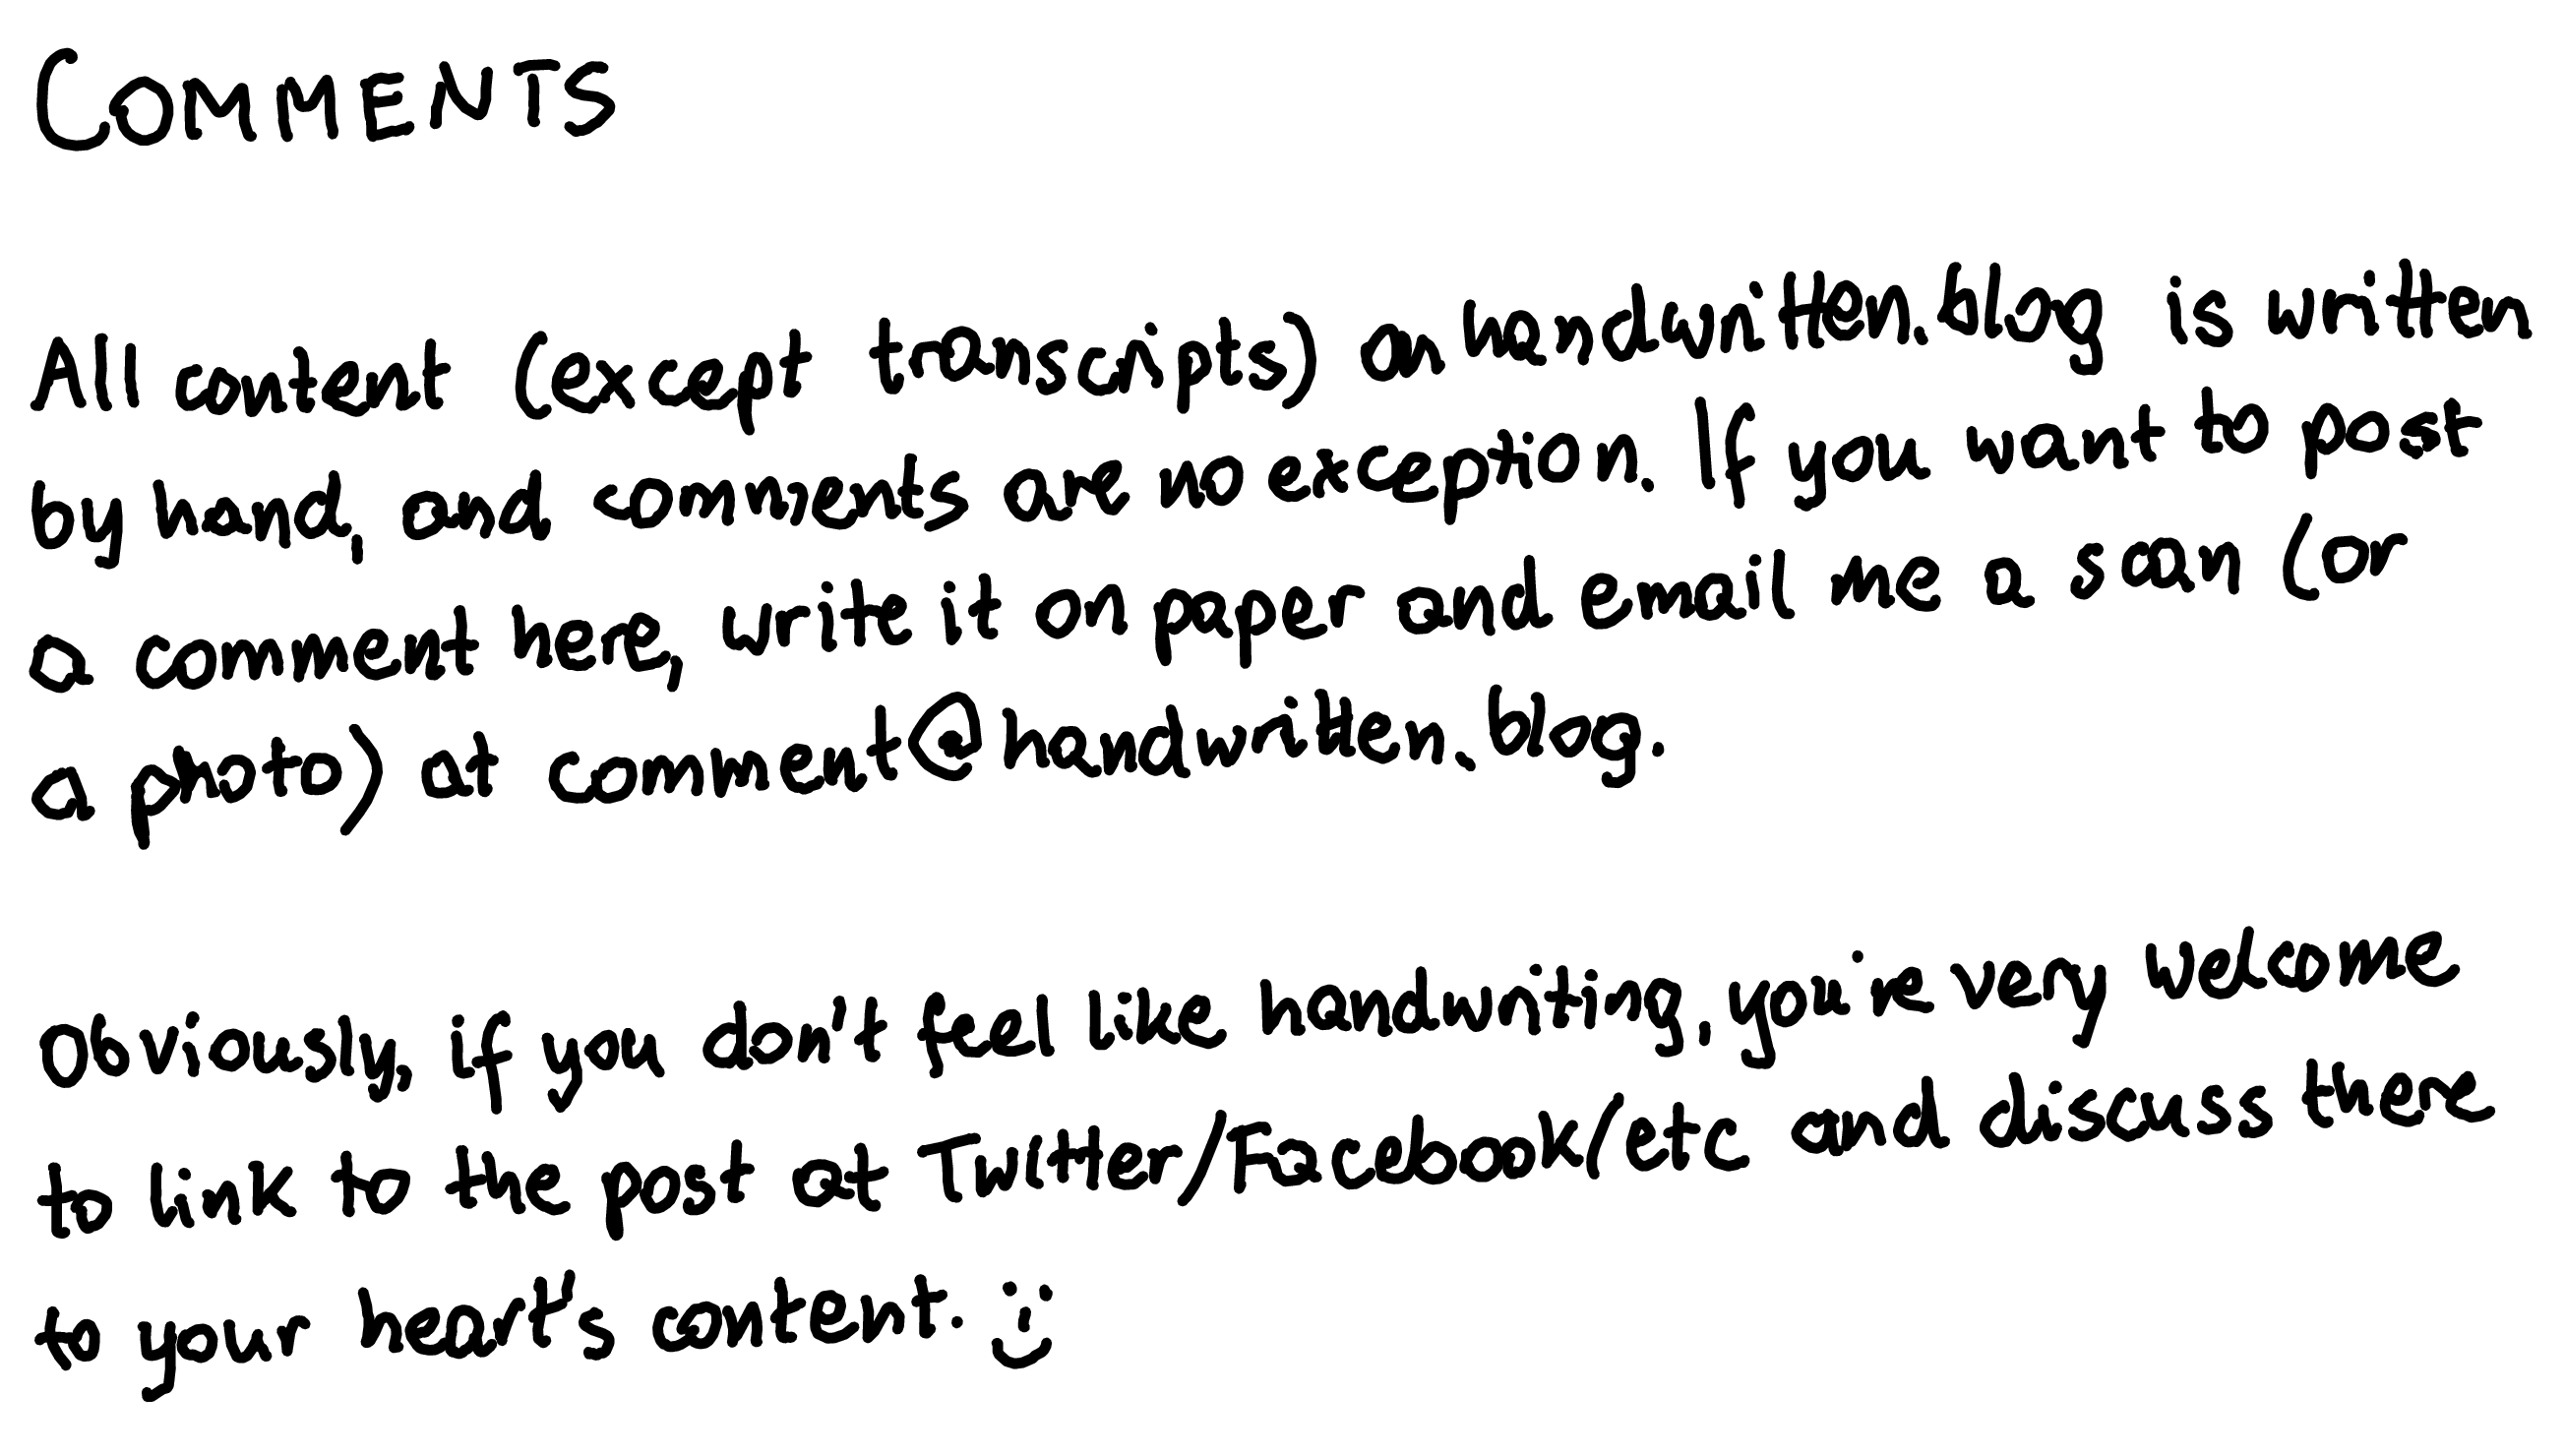 All content (except transcripts) on handwritten.blog is written by hand, and comments are no exception. If you want to post a comment here, write it on paper and email me a scan (or a photo) at comment@handwritten.blog. Obviously, if you don't feel like handwriting, you're very welcome to link to the post at Twitter/Facebook/etc and discuss there to your heart's content. ðŸ˜Š